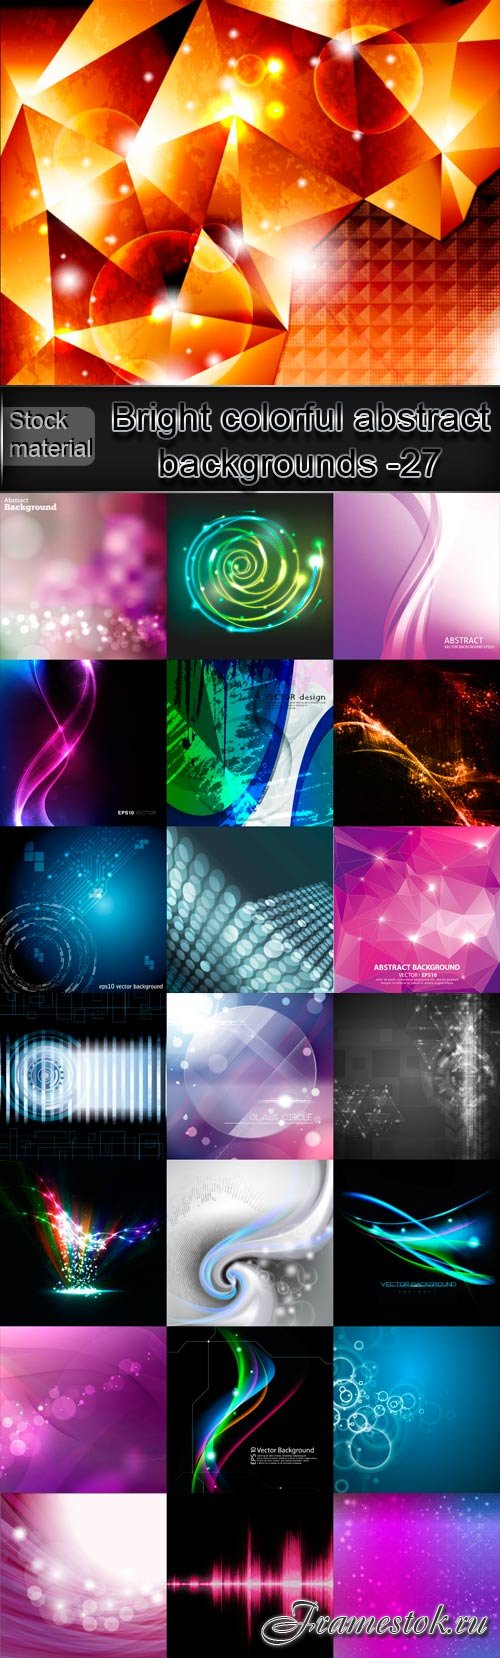 Bright colorful abstract backgrounds vector -27